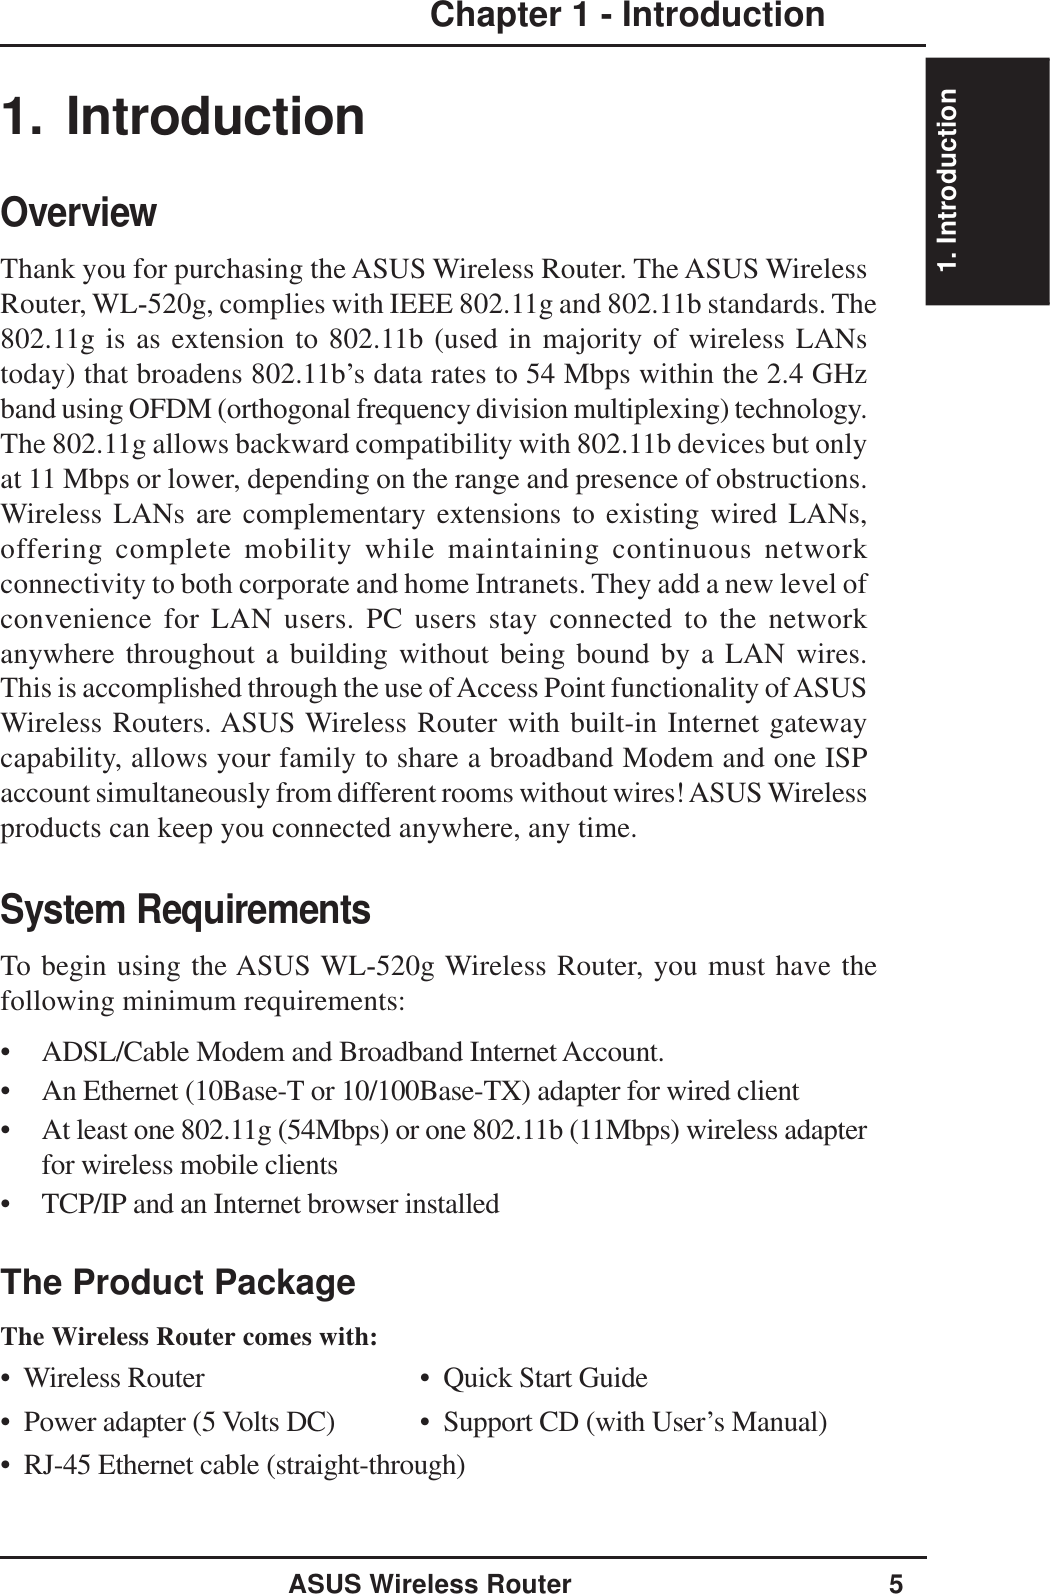 1. IntroductionASUS Wireless Router 5Chapter 1 - Introduction1. IntroductionOverviewThank you for purchasing the ASUS Wireless Router. The ASUS WirelessRouter, WL-520g, complies with IEEE 802.11g and 802.11b standards. The802.11g is as extension to 802.11b (used in majority of wireless LANstoday) that broadens 802.11b’s data rates to 54 Mbps within the 2.4 GHzband using OFDM (orthogonal frequency division multiplexing) technology.The 802.11g allows backward compatibility with 802.11b devices but onlyat 11 Mbps or lower, depending on the range and presence of obstructions.Wireless LANs are complementary extensions to existing wired LANs,offering complete mobility while maintaining continuous networkconnectivity to both corporate and home Intranets. They add a new level ofconvenience for LAN users. PC users stay connected to the networkanywhere throughout a building without being bound by a LAN wires.This is accomplished through the use of Access Point functionality of ASUSWireless Routers. ASUS Wireless Router with built-in Internet gatewaycapability, allows your family to share a broadband Modem and one ISPaccount simultaneously from different rooms without wires! ASUS Wirelessproducts can keep you connected anywhere, any time.System RequirementsTo begin using the ASUS WL-520g Wireless Router, you must have thefollowing minimum requirements:• ADSL/Cable Modem and Broadband Internet Account.• An Ethernet (10Base-T or 10/100Base-TX) adapter for wired client• At least one 802.11g (54Mbps) or one 802.11b (11Mbps) wireless adapterfor wireless mobile clients• TCP/IP and an Internet browser installedThe Product PackageThe Wireless Router comes with:•  Wireless Router •  Quick Start Guide•  Power adapter (5 Volts DC) •  Support CD (with User’s Manual)•  RJ-45 Ethernet cable (straight-through)